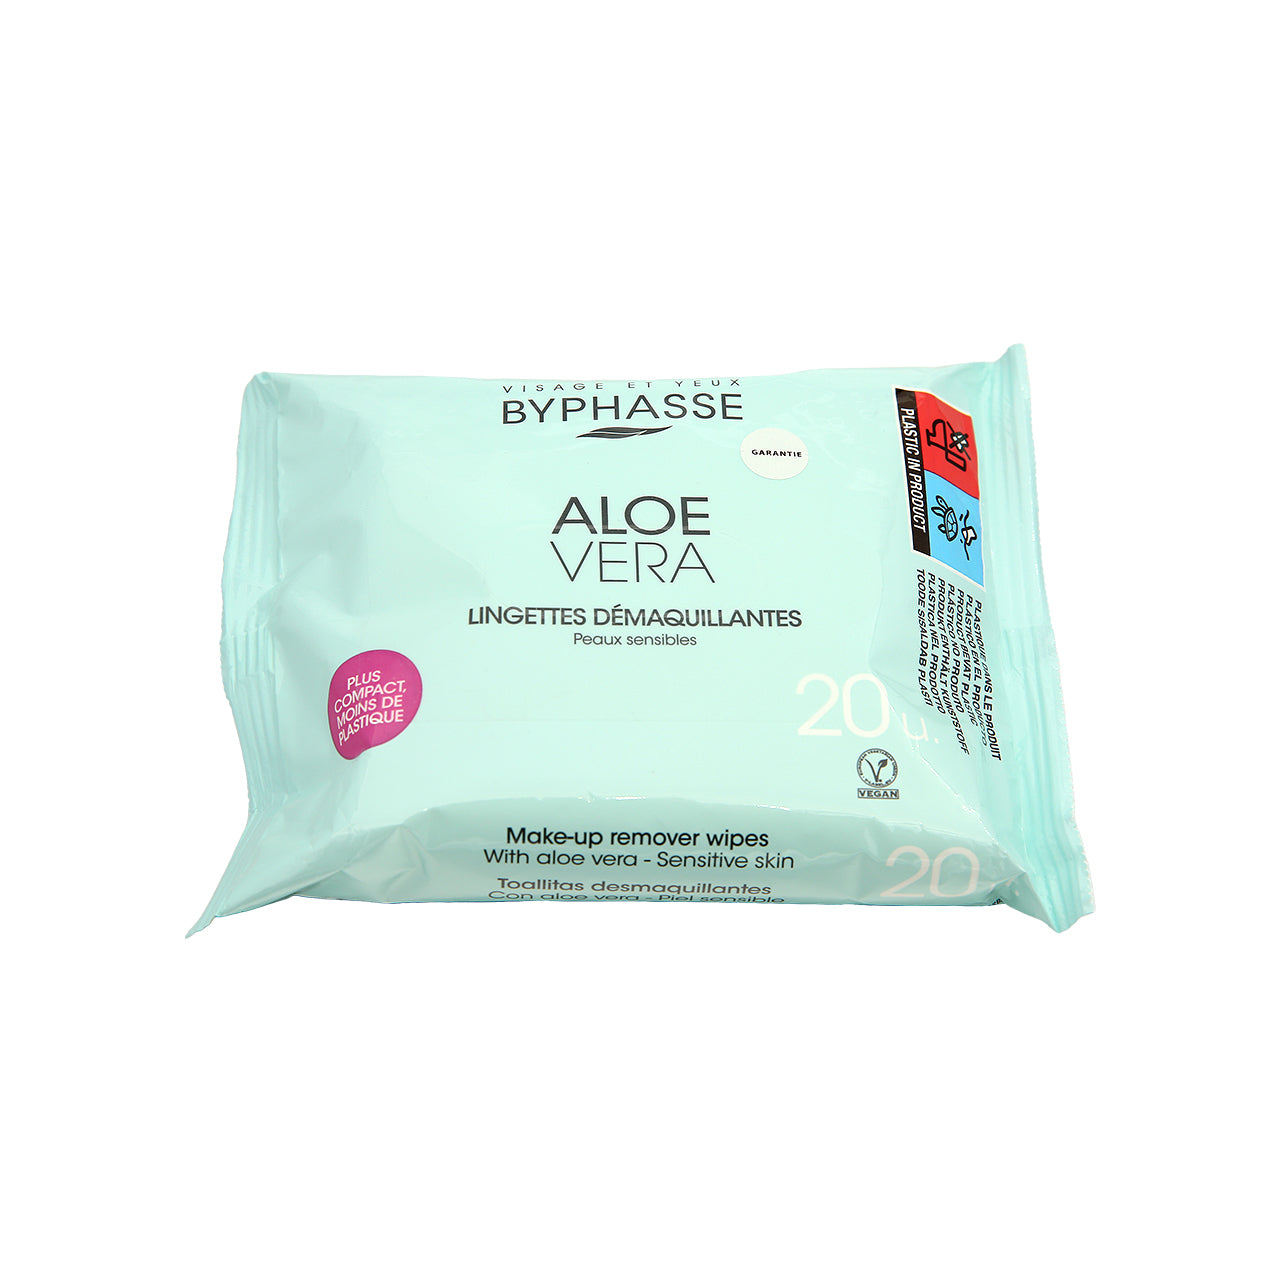 Byphasse Aloe Vera Make-Up Remover Wip 20pcs